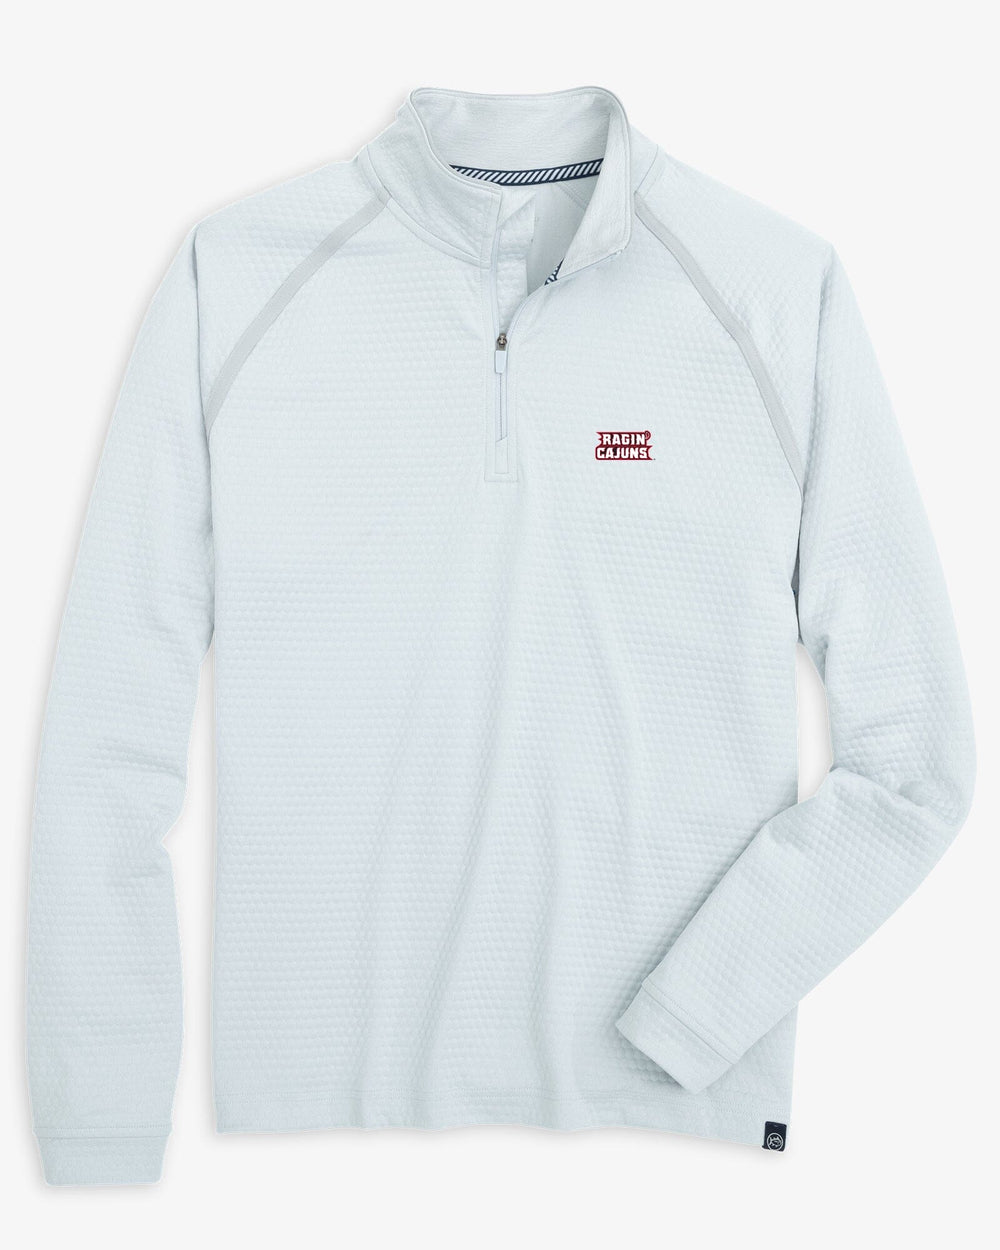 The front view of the University of Louisiana-Lafayette Scuttle Heather Quarter Zip by Southern Tide - Heather Slate Grey